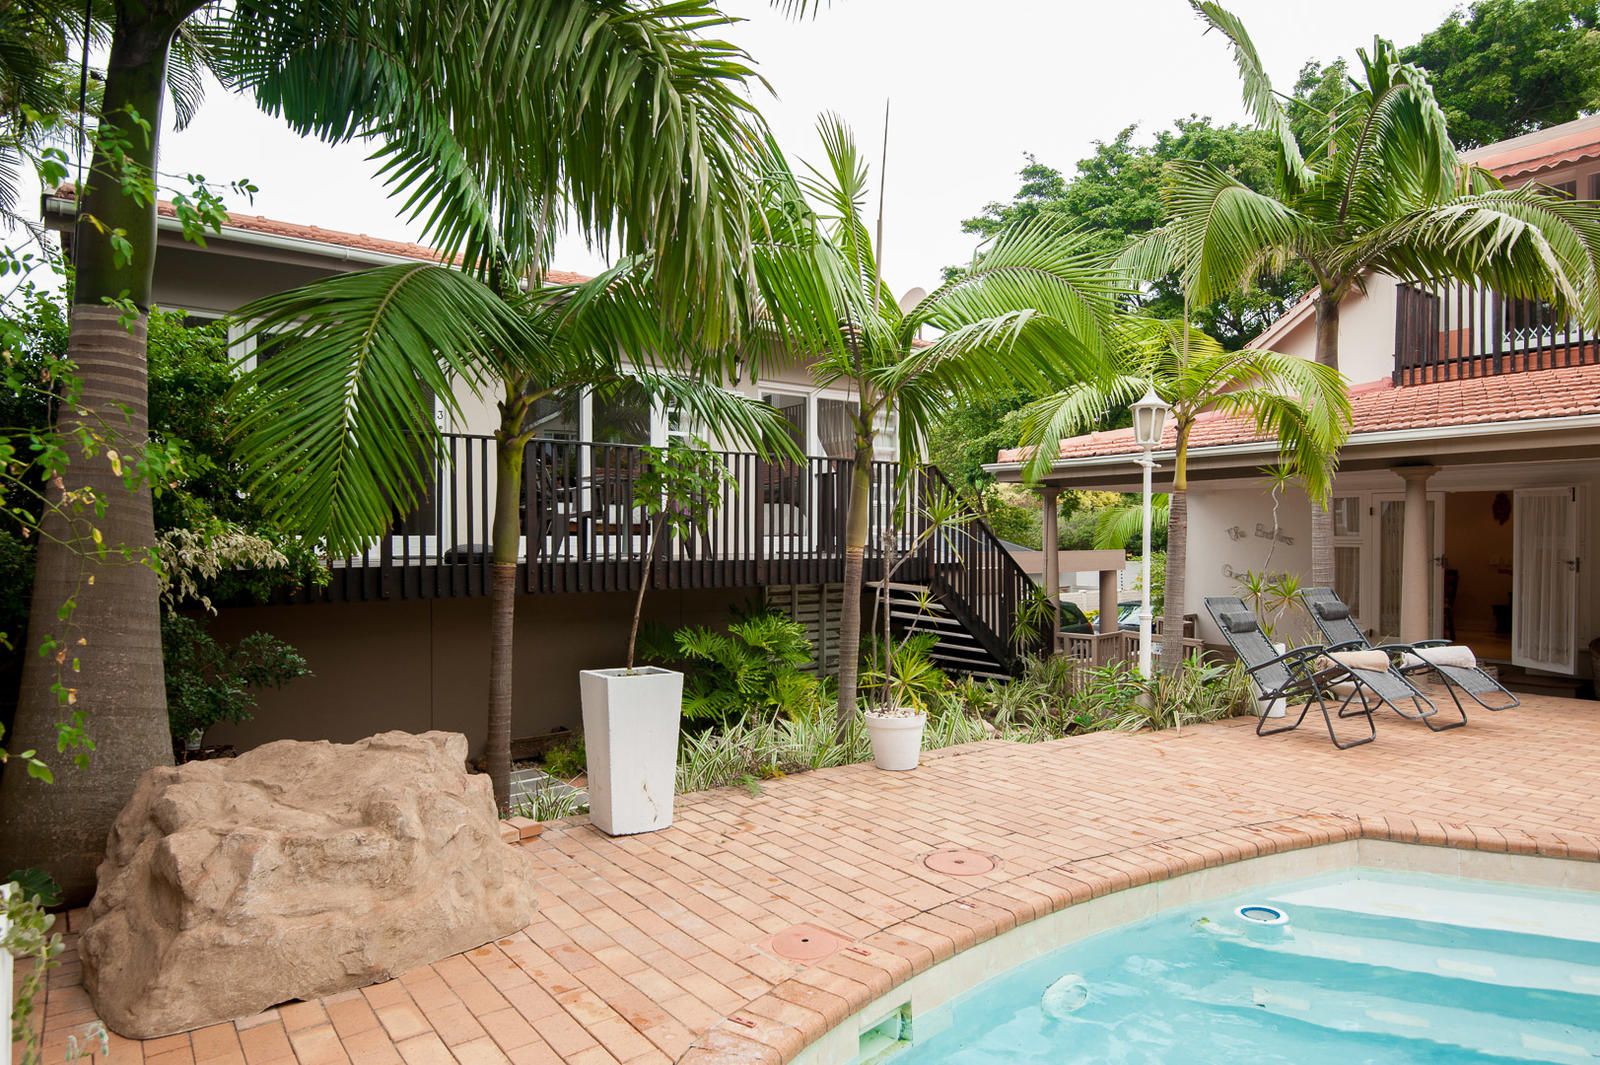 The Brother S Guest House Durban North Durban Kwazulu Natal South Africa House, Building, Architecture, Palm Tree, Plant, Nature, Wood, Swimming Pool